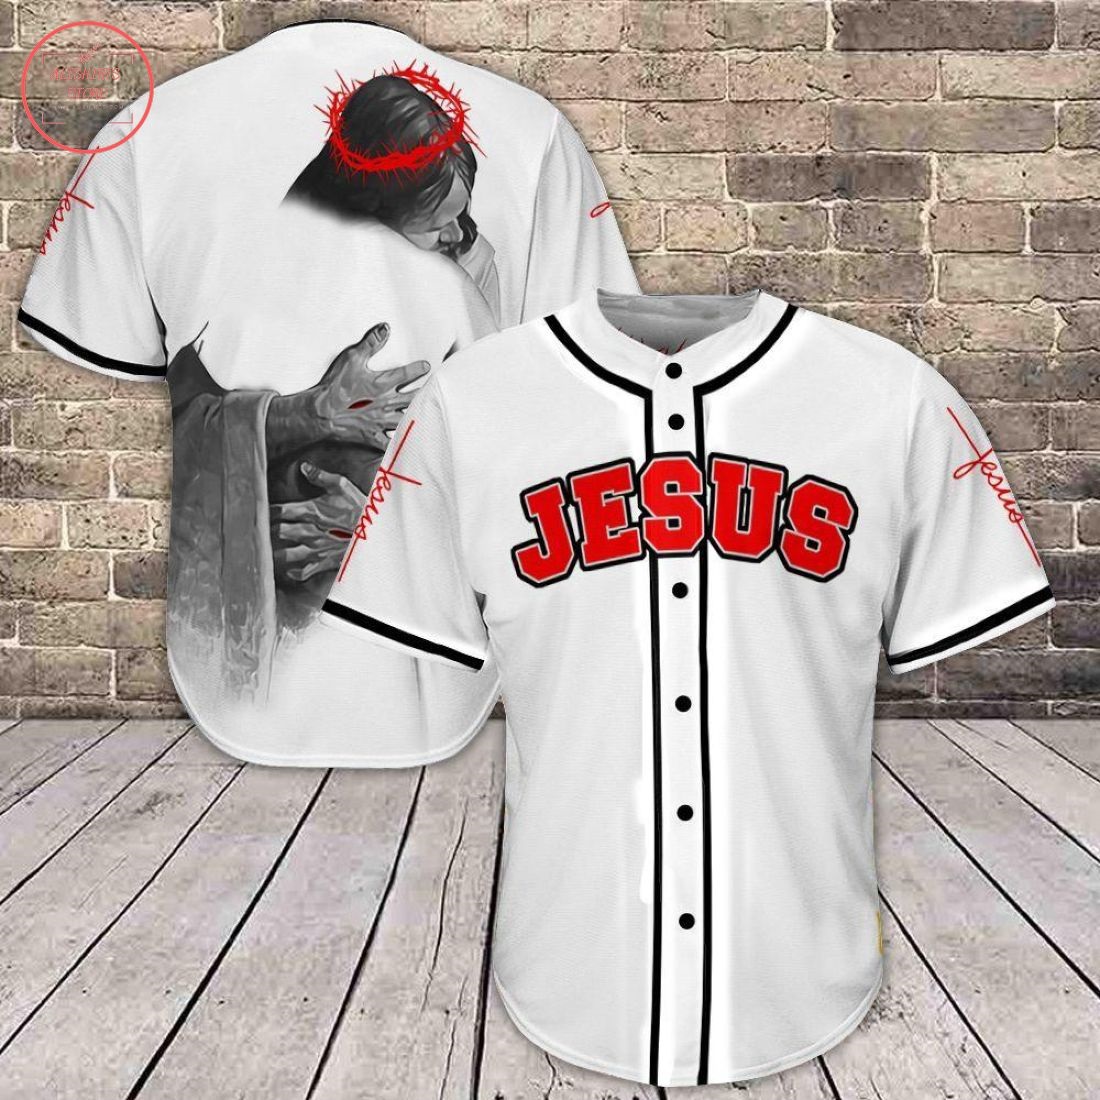 Jesus in The Arms of Lord Baseball Jersey